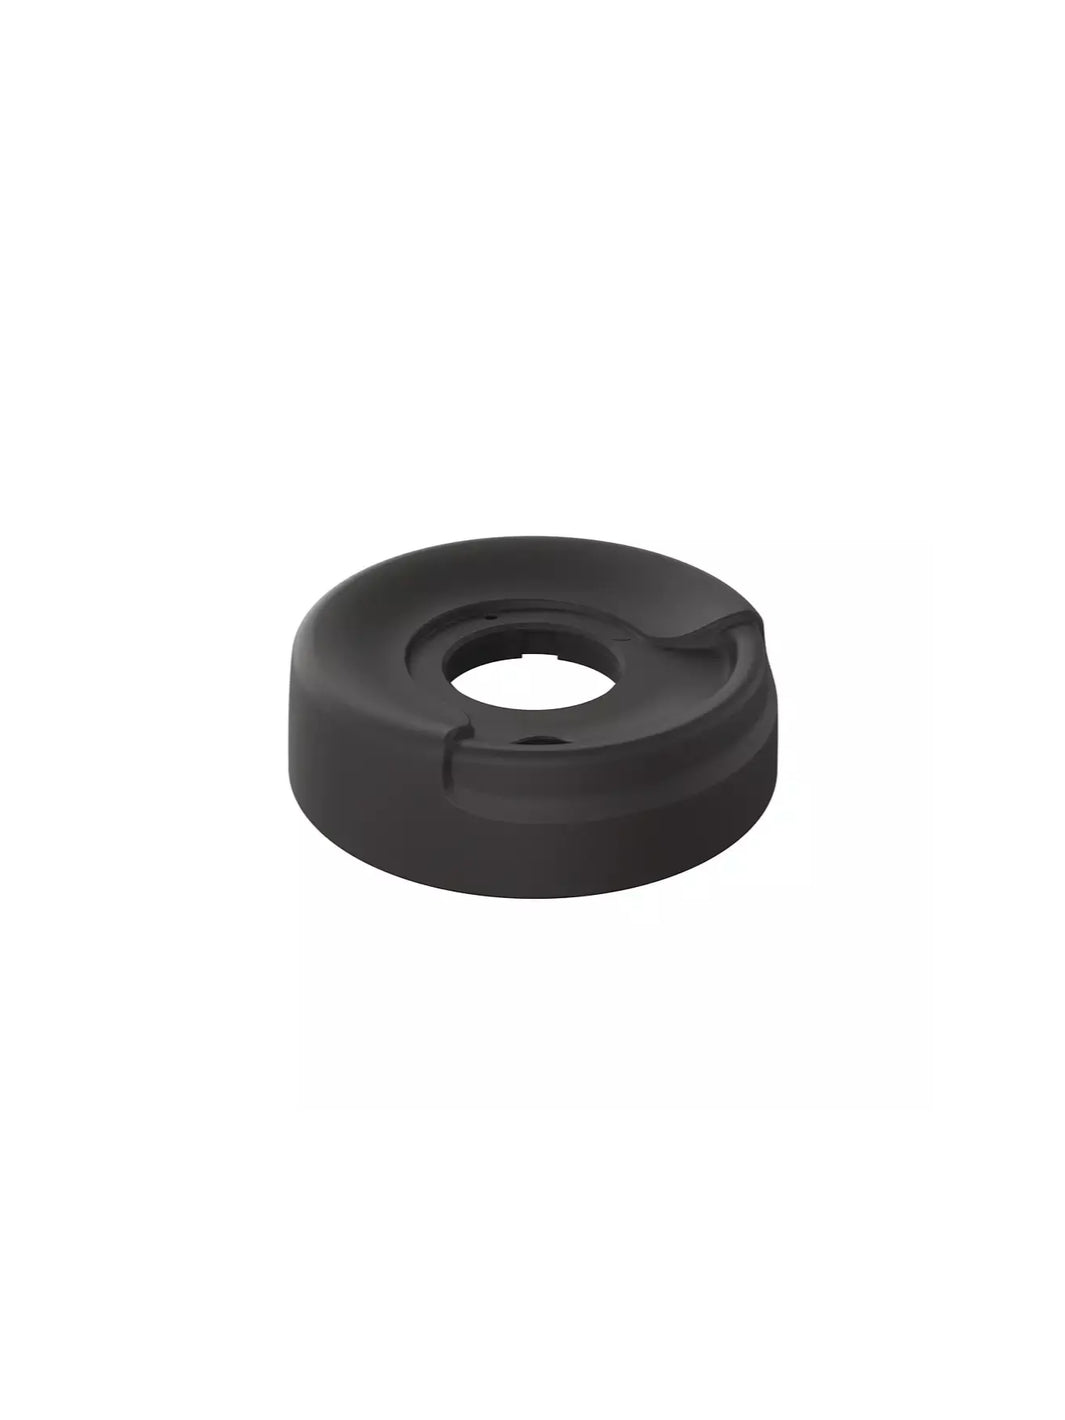 KEEPCUP Replacement Helix Twist Fit Lid